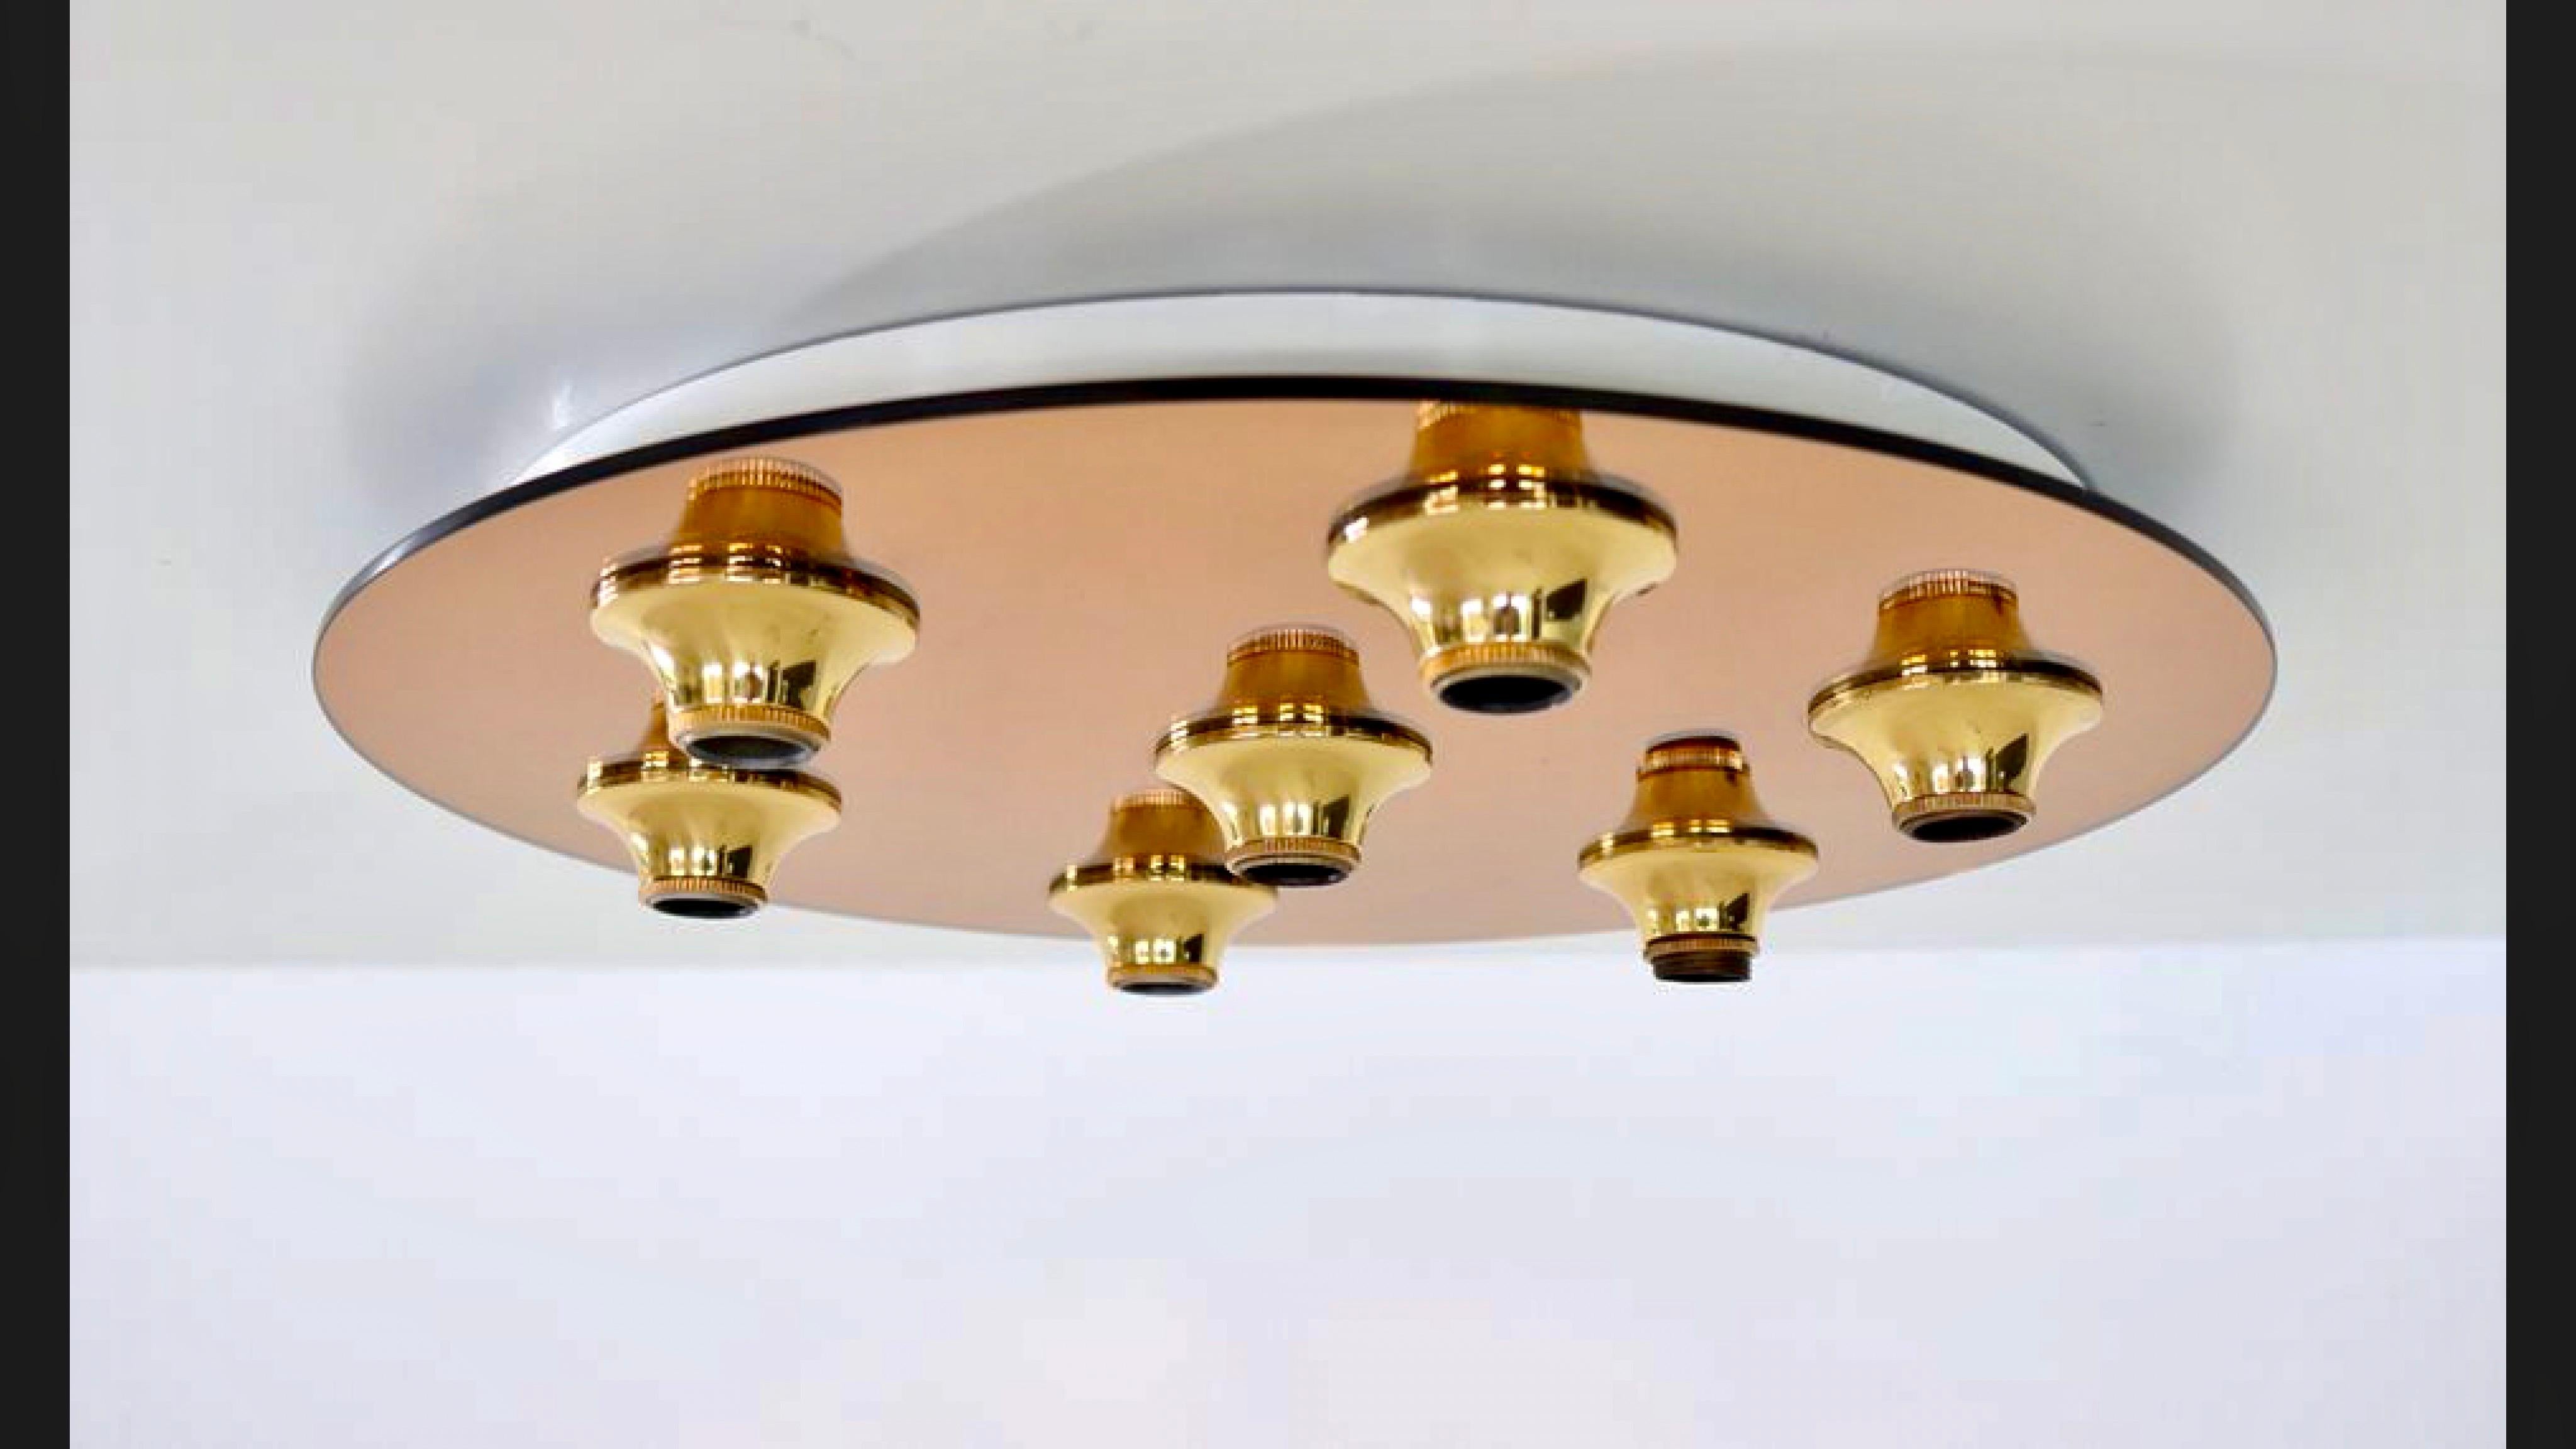 Seven brass cones are mount to mirrored glass to perfectly reflect each bulb, giving the illusion of lights floating in space. 
Measures: Diameter 45 cm.
Depth 6 cm.